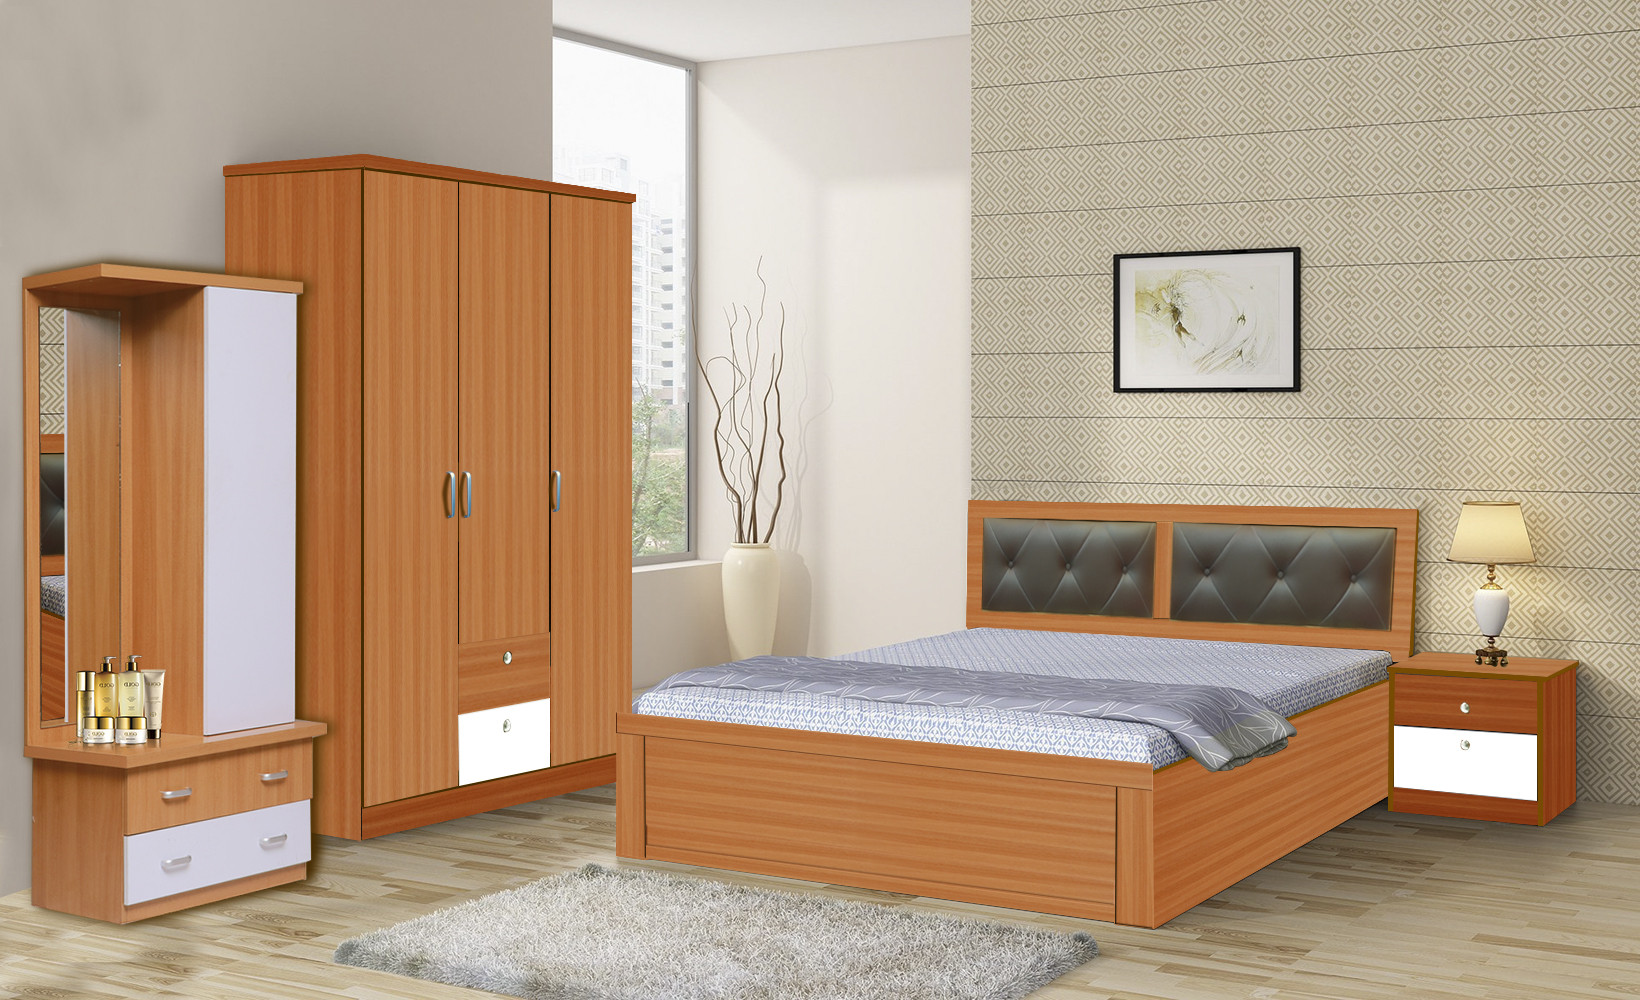 Portar Bedroom Set With Manual Storage from POJ Furniture